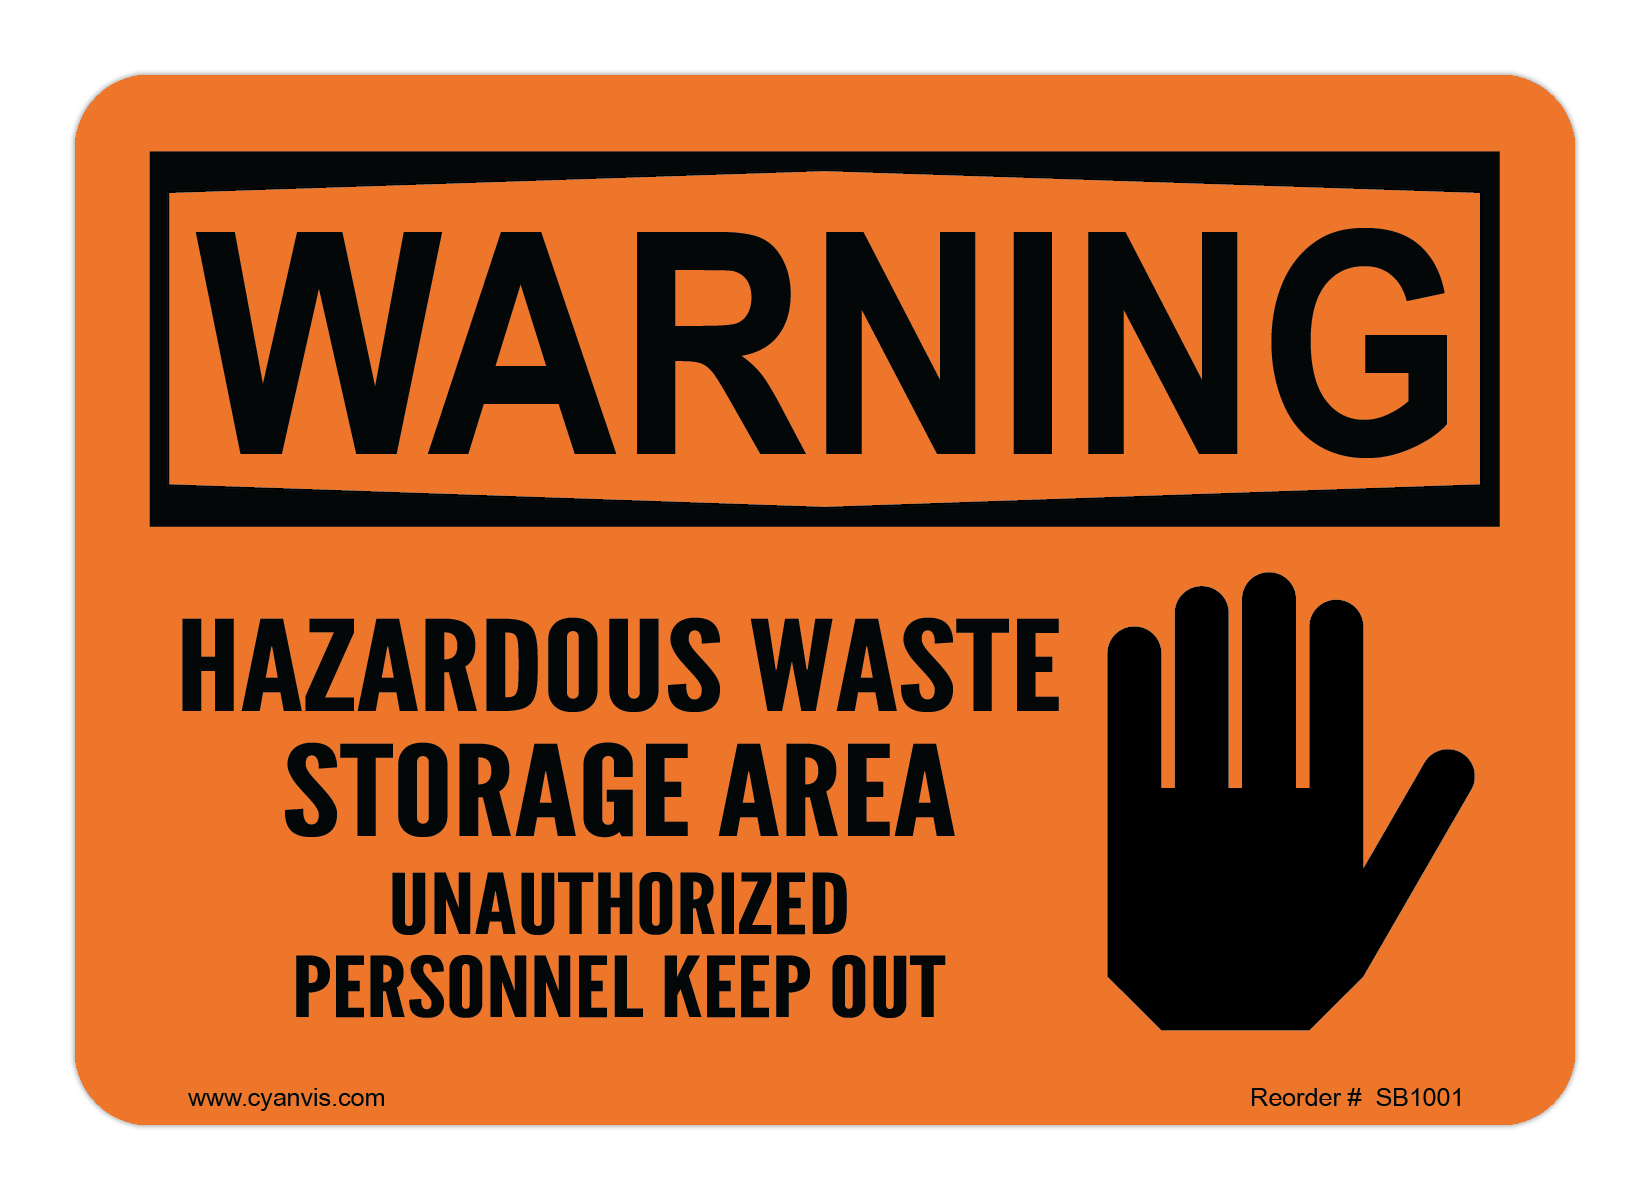 Safety Sign: Warning - HAZARDOUS WASTE STORAGE AREA UNAUTHORIZED PERSONNEL KEEP OUT - CYANvisuals